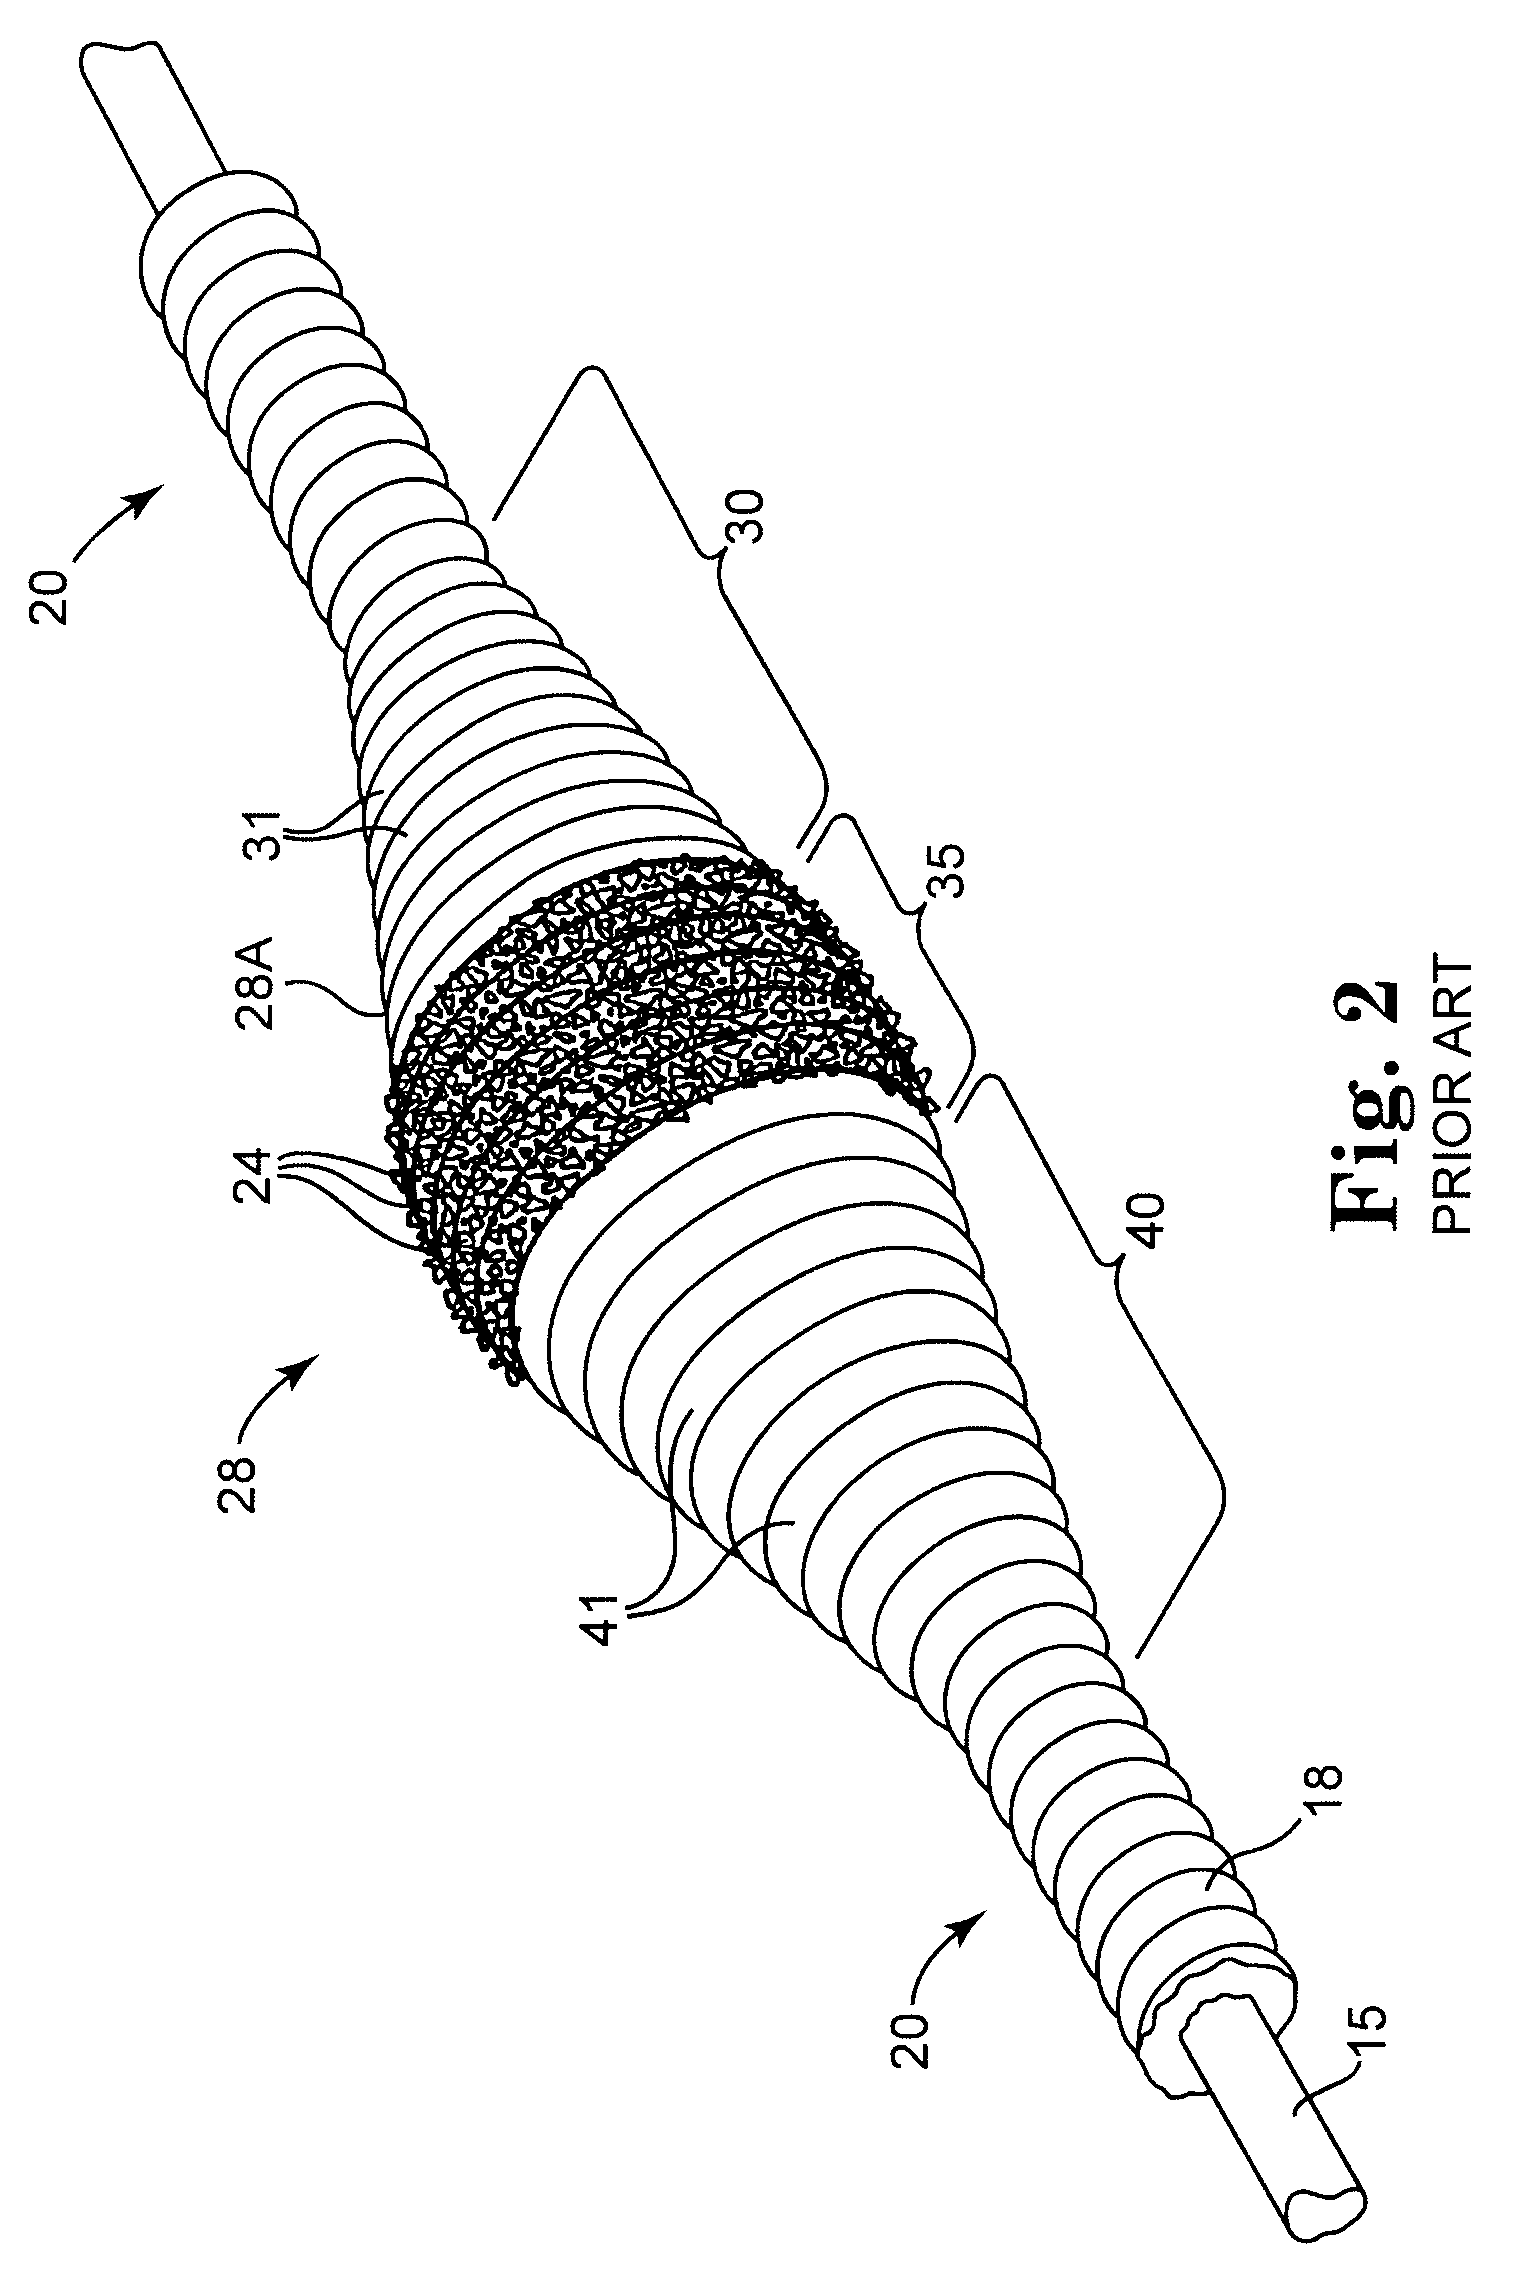 Method and apparatus for increasing rotational amplitude of abrasive element on high-speed rotational atherectomy device